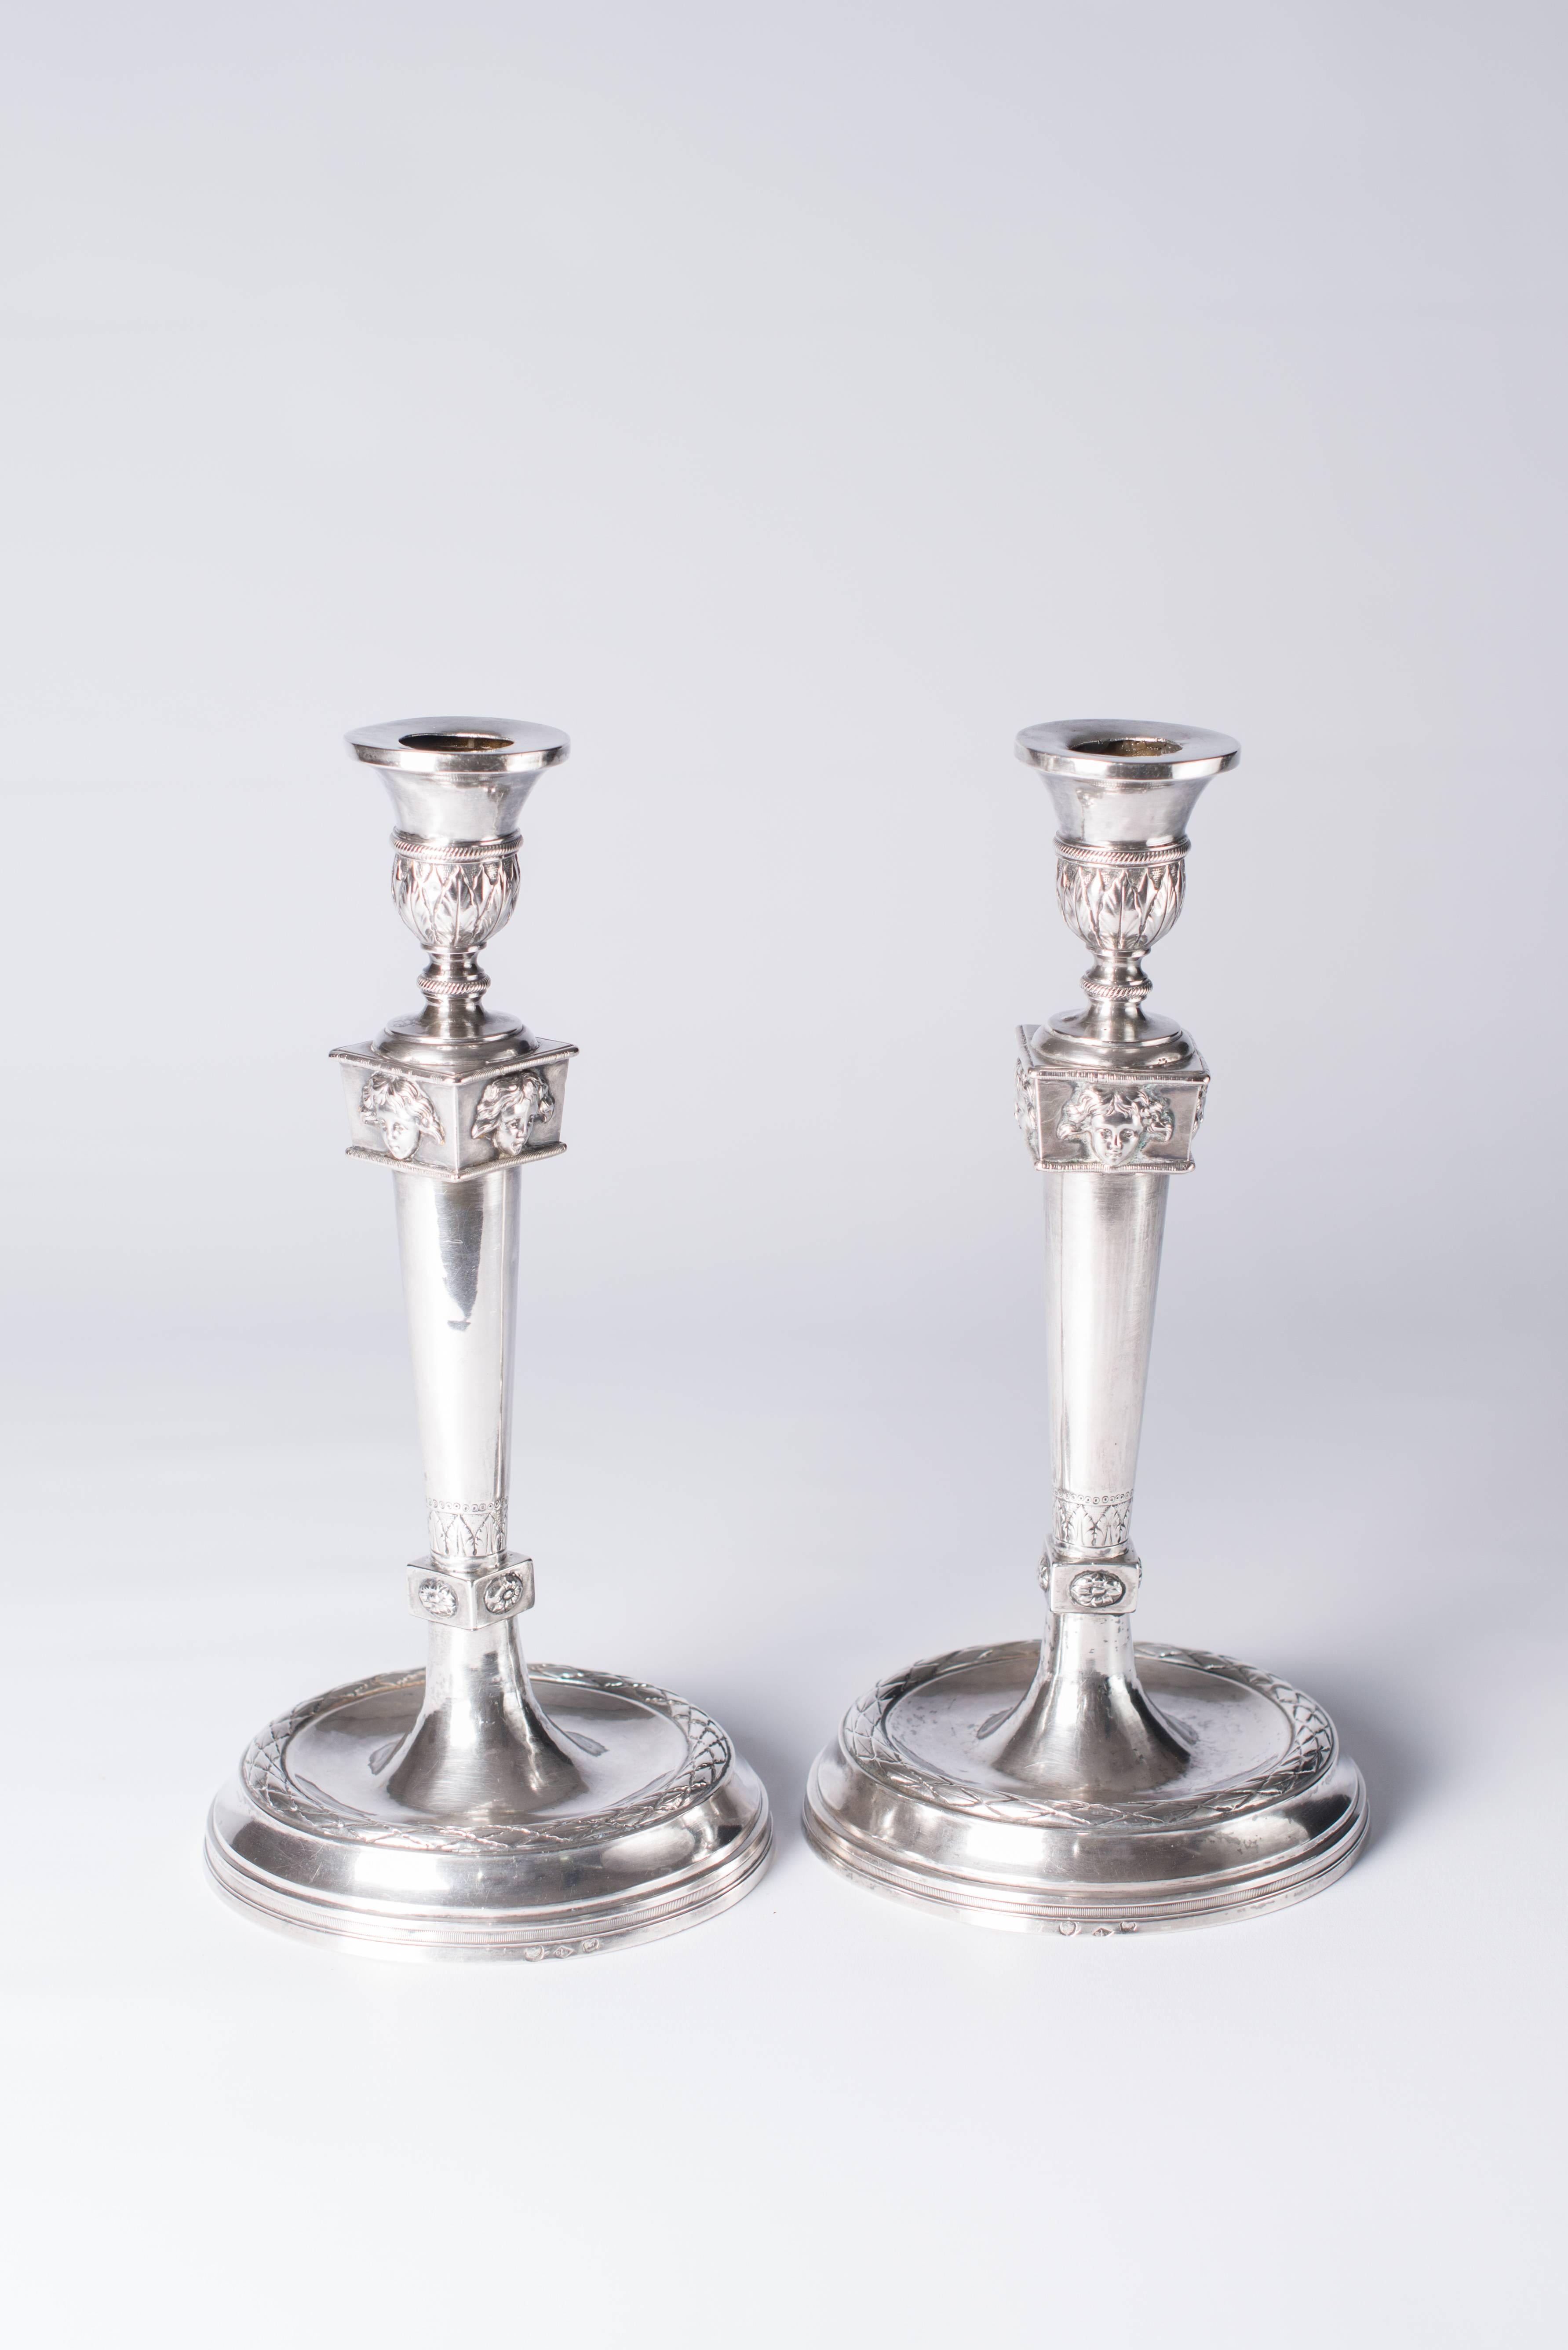 Pair of French Empire silver candlesticks are well casted. Each on a circular moulded base with sunken centre, the plain tapering stem between a small and larger square knob with stylised foliage and masks, the vase-shaped candleholder with acanthus